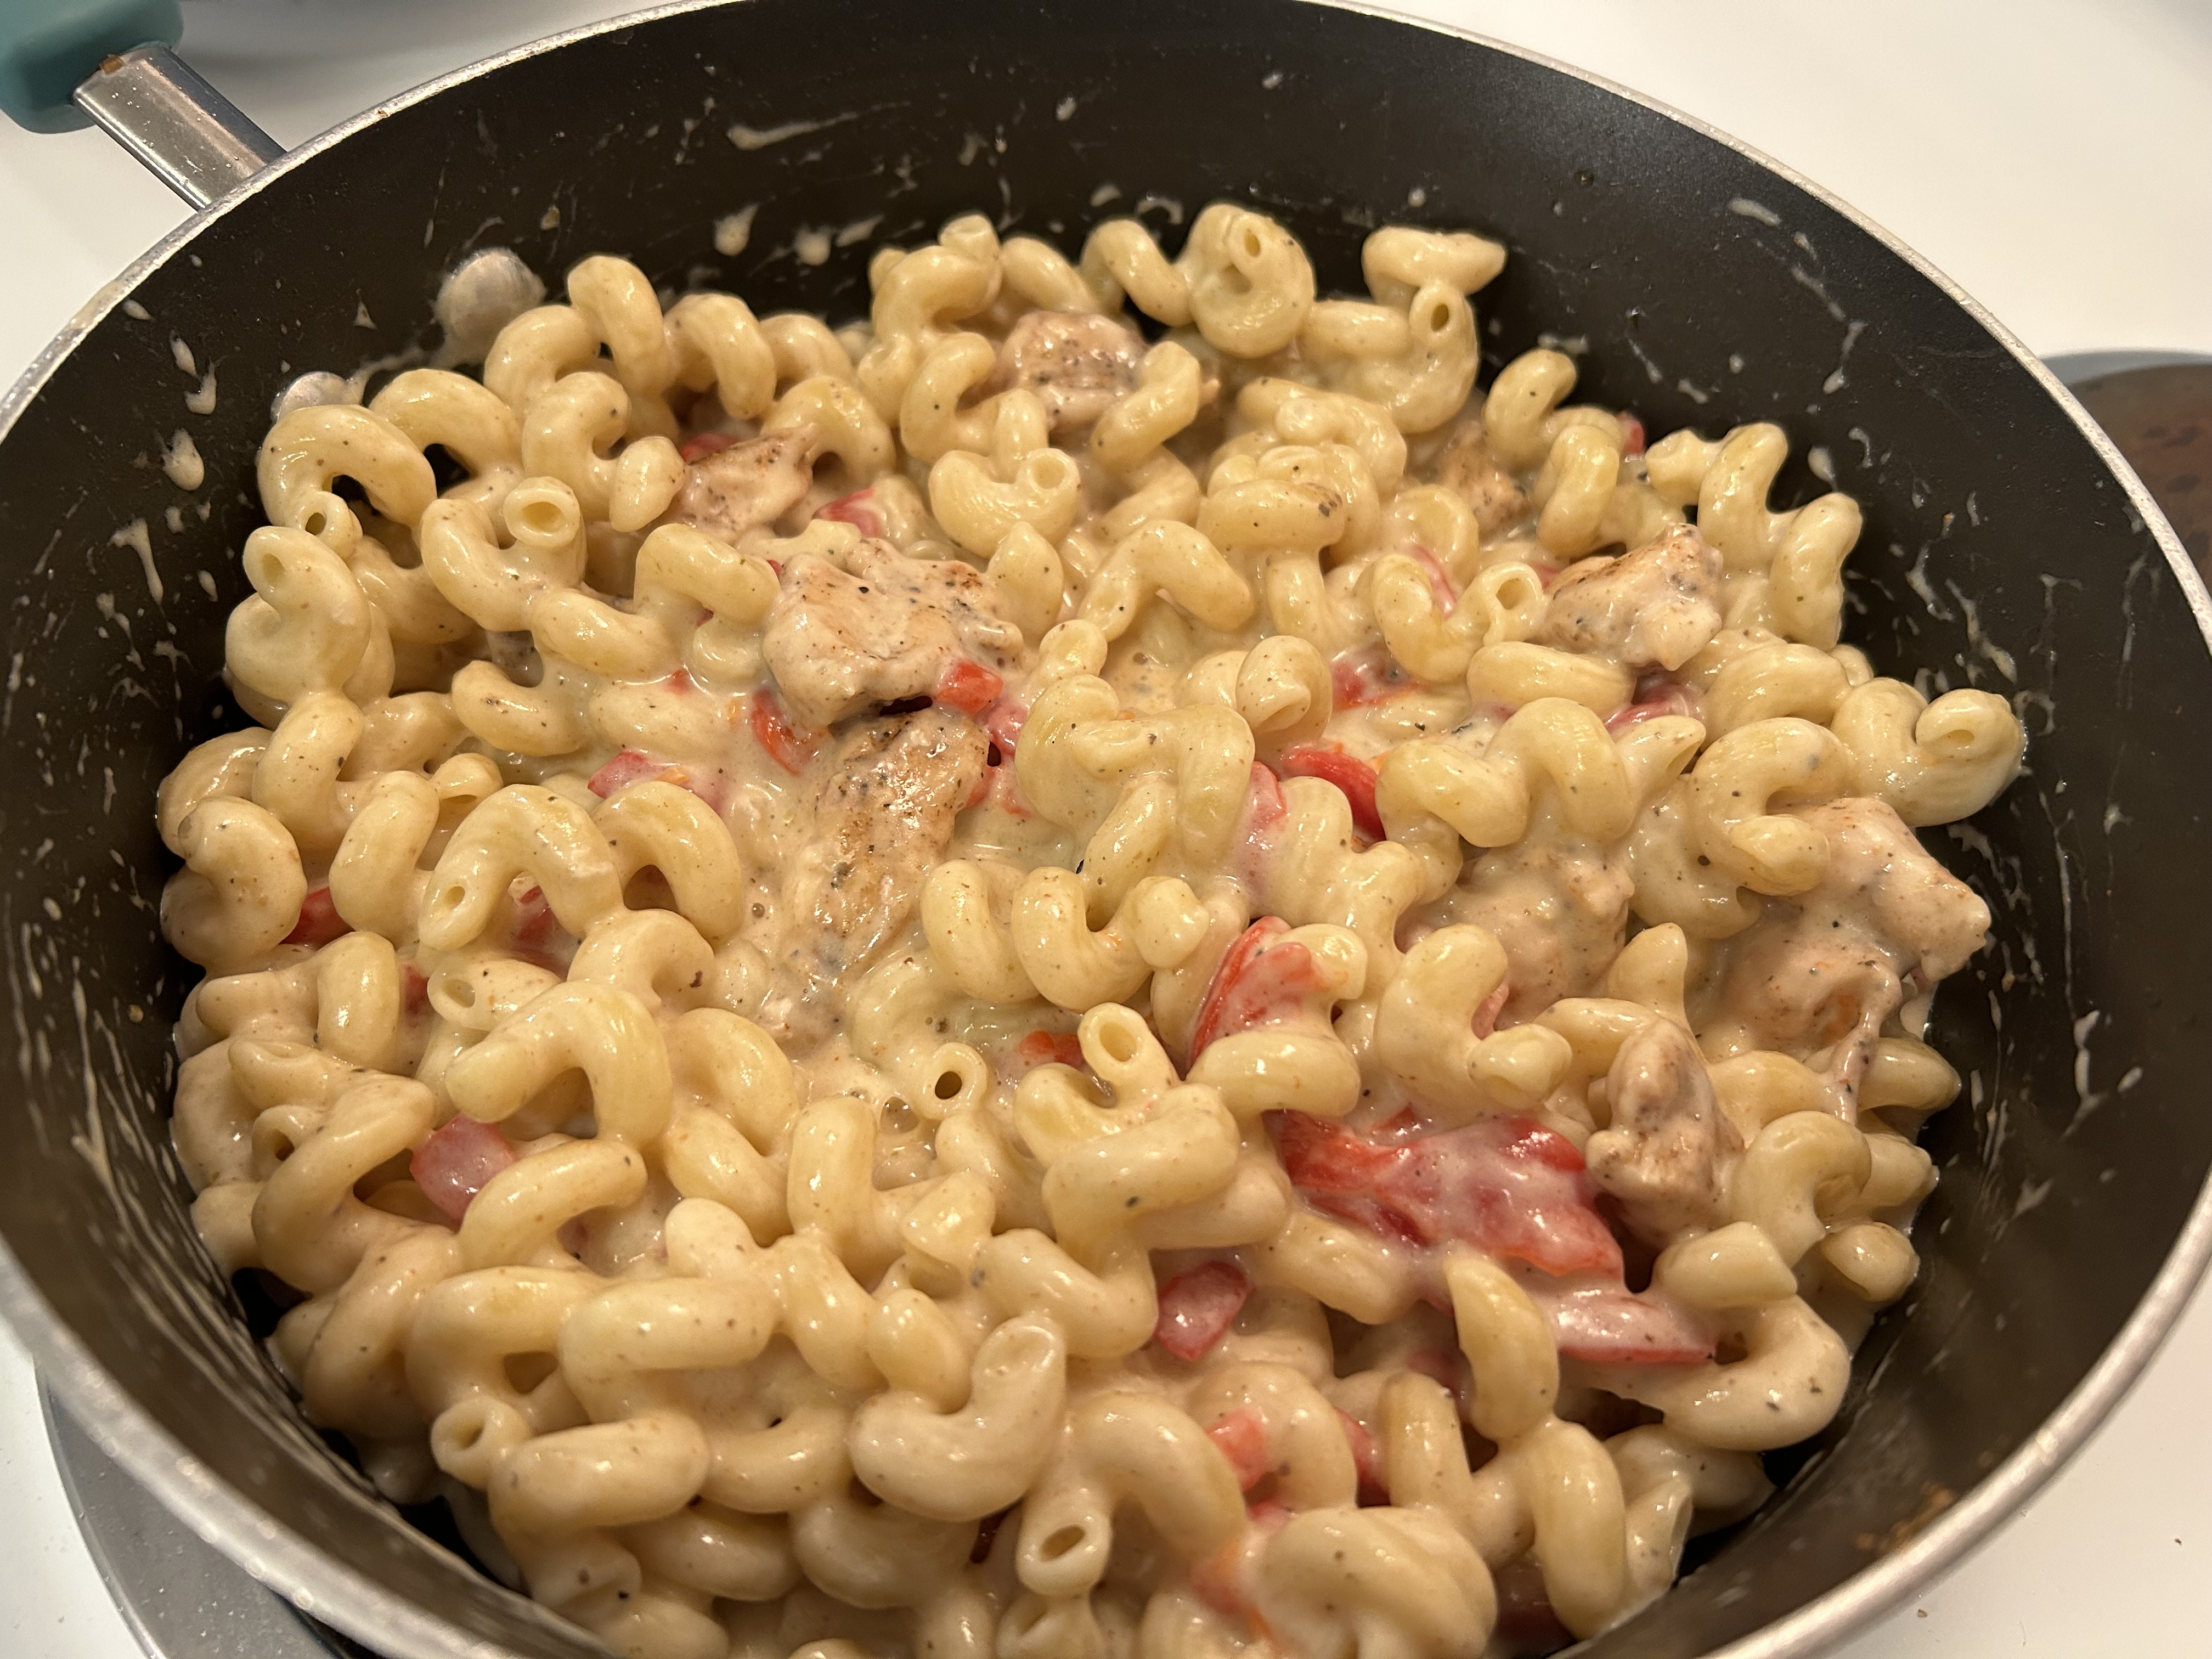 A photo of pasta with peppers and chicken, taken with the iPhone 14.